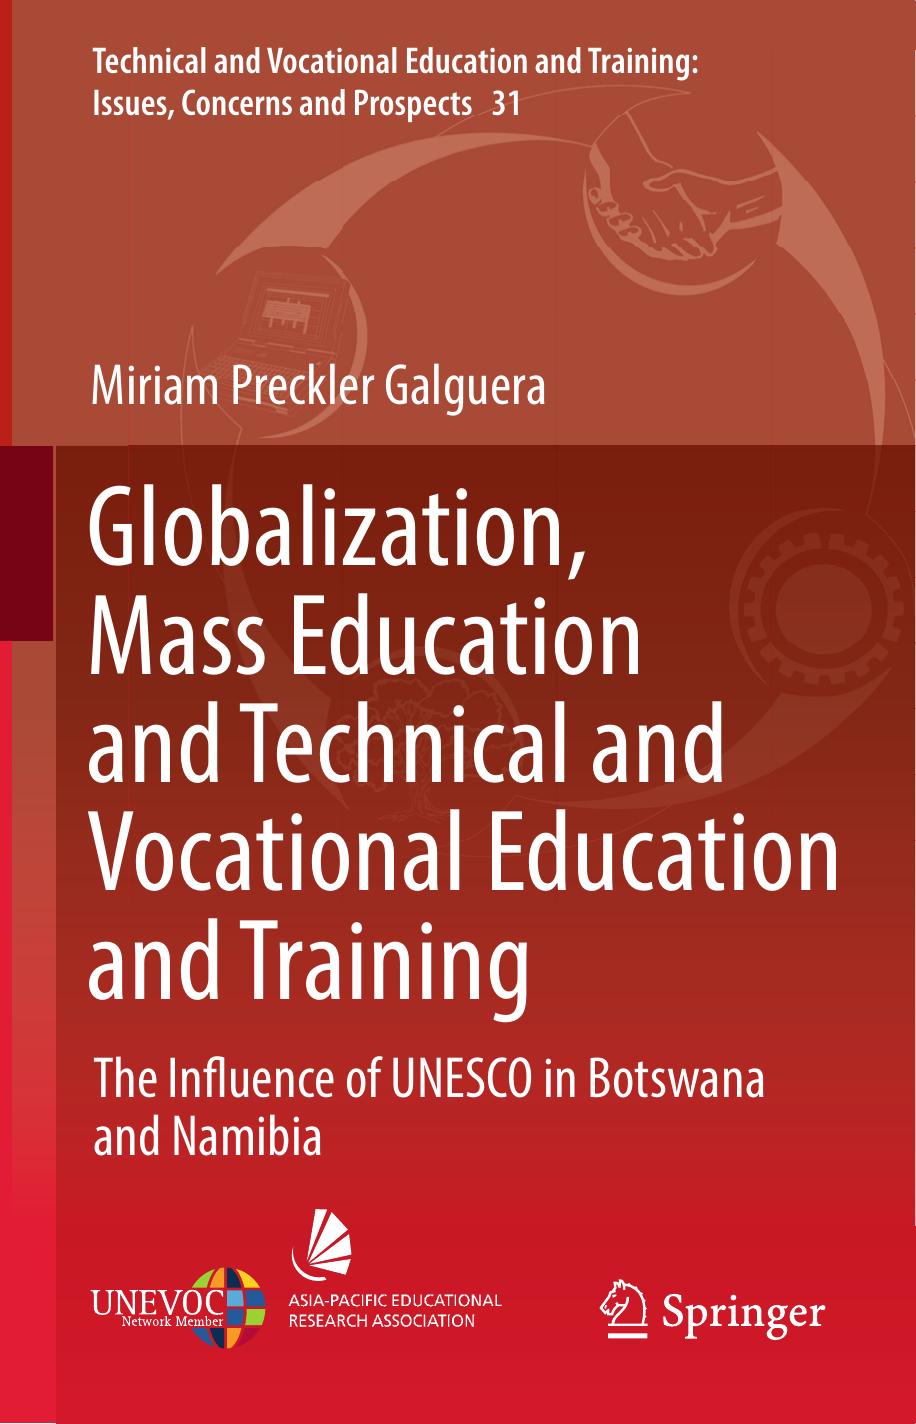 Globalization, Mass Education and Technical and Vocational Education and Training 2017